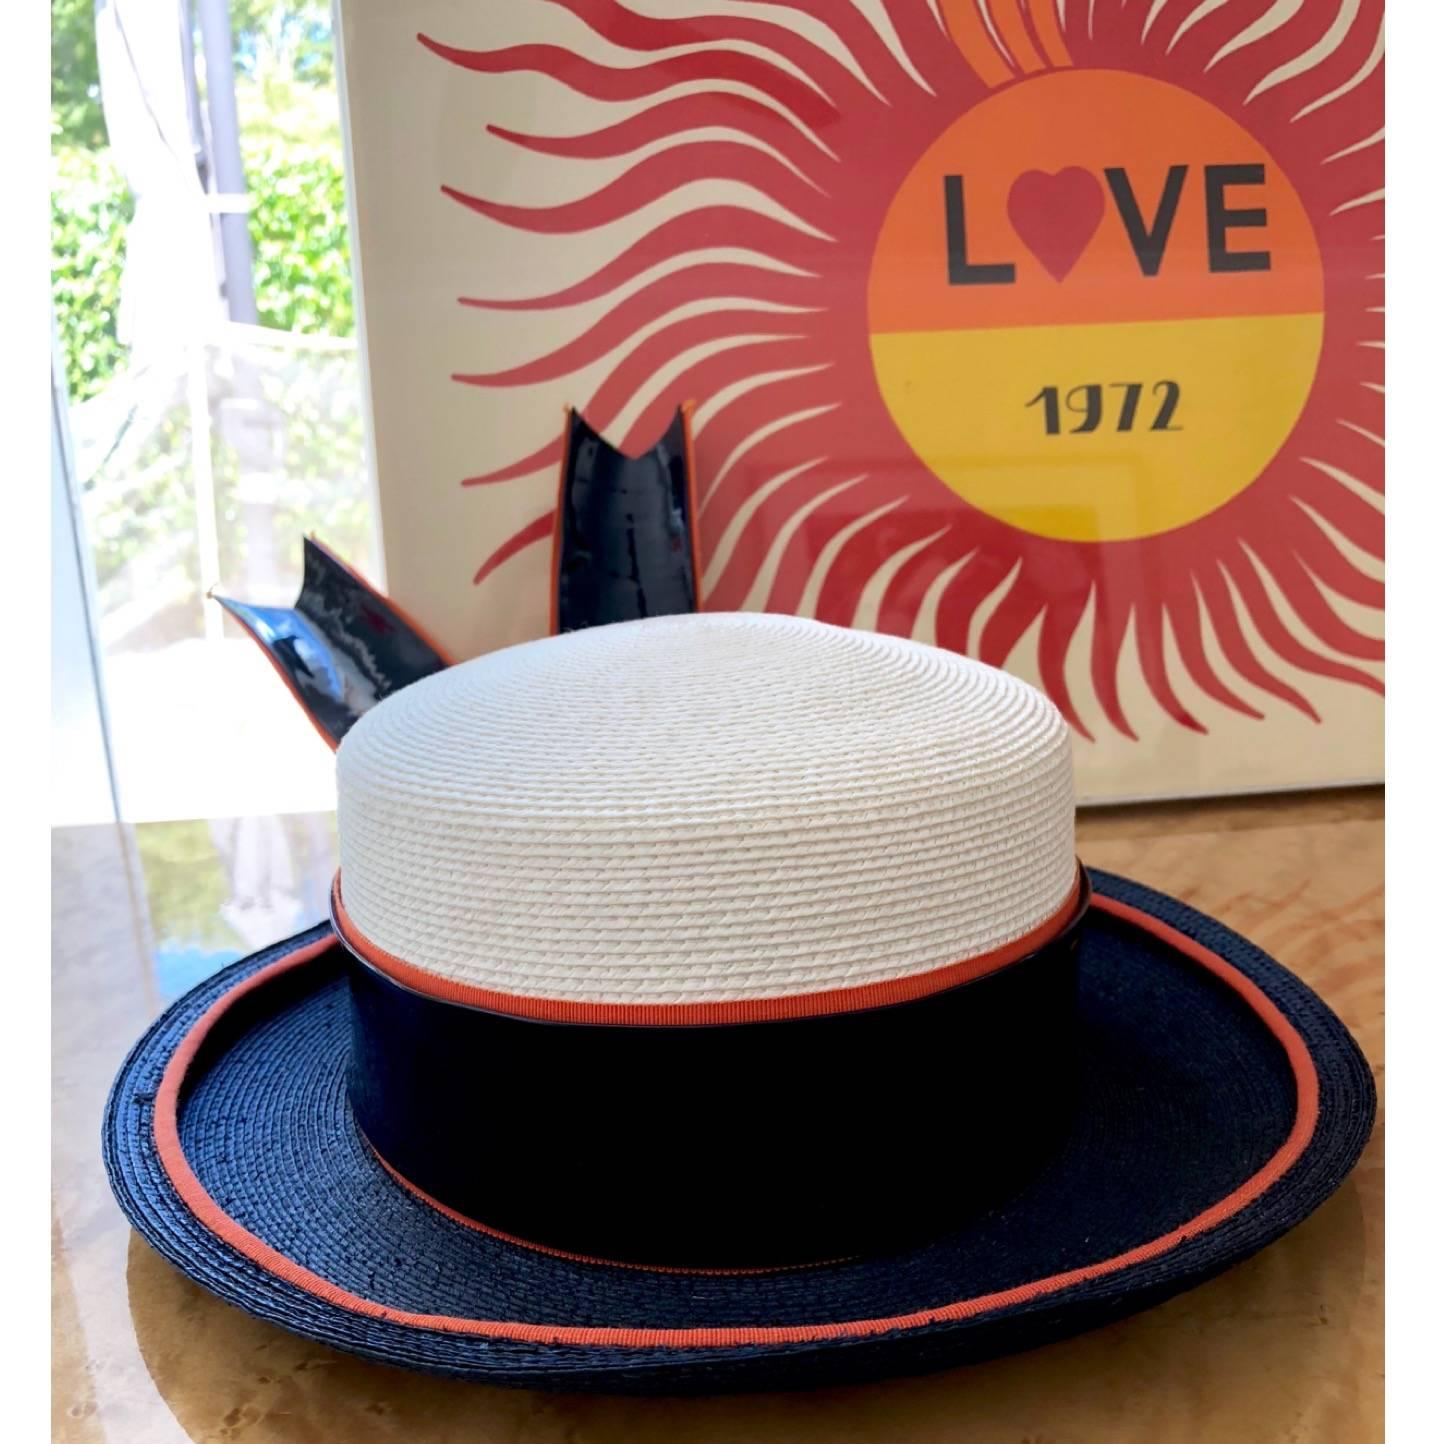 1960s Yves Saint Laurent Ivory and Navy Derby Hat Patent Leather Orange Hatband In Excellent Condition For Sale In Boca Raton, FL